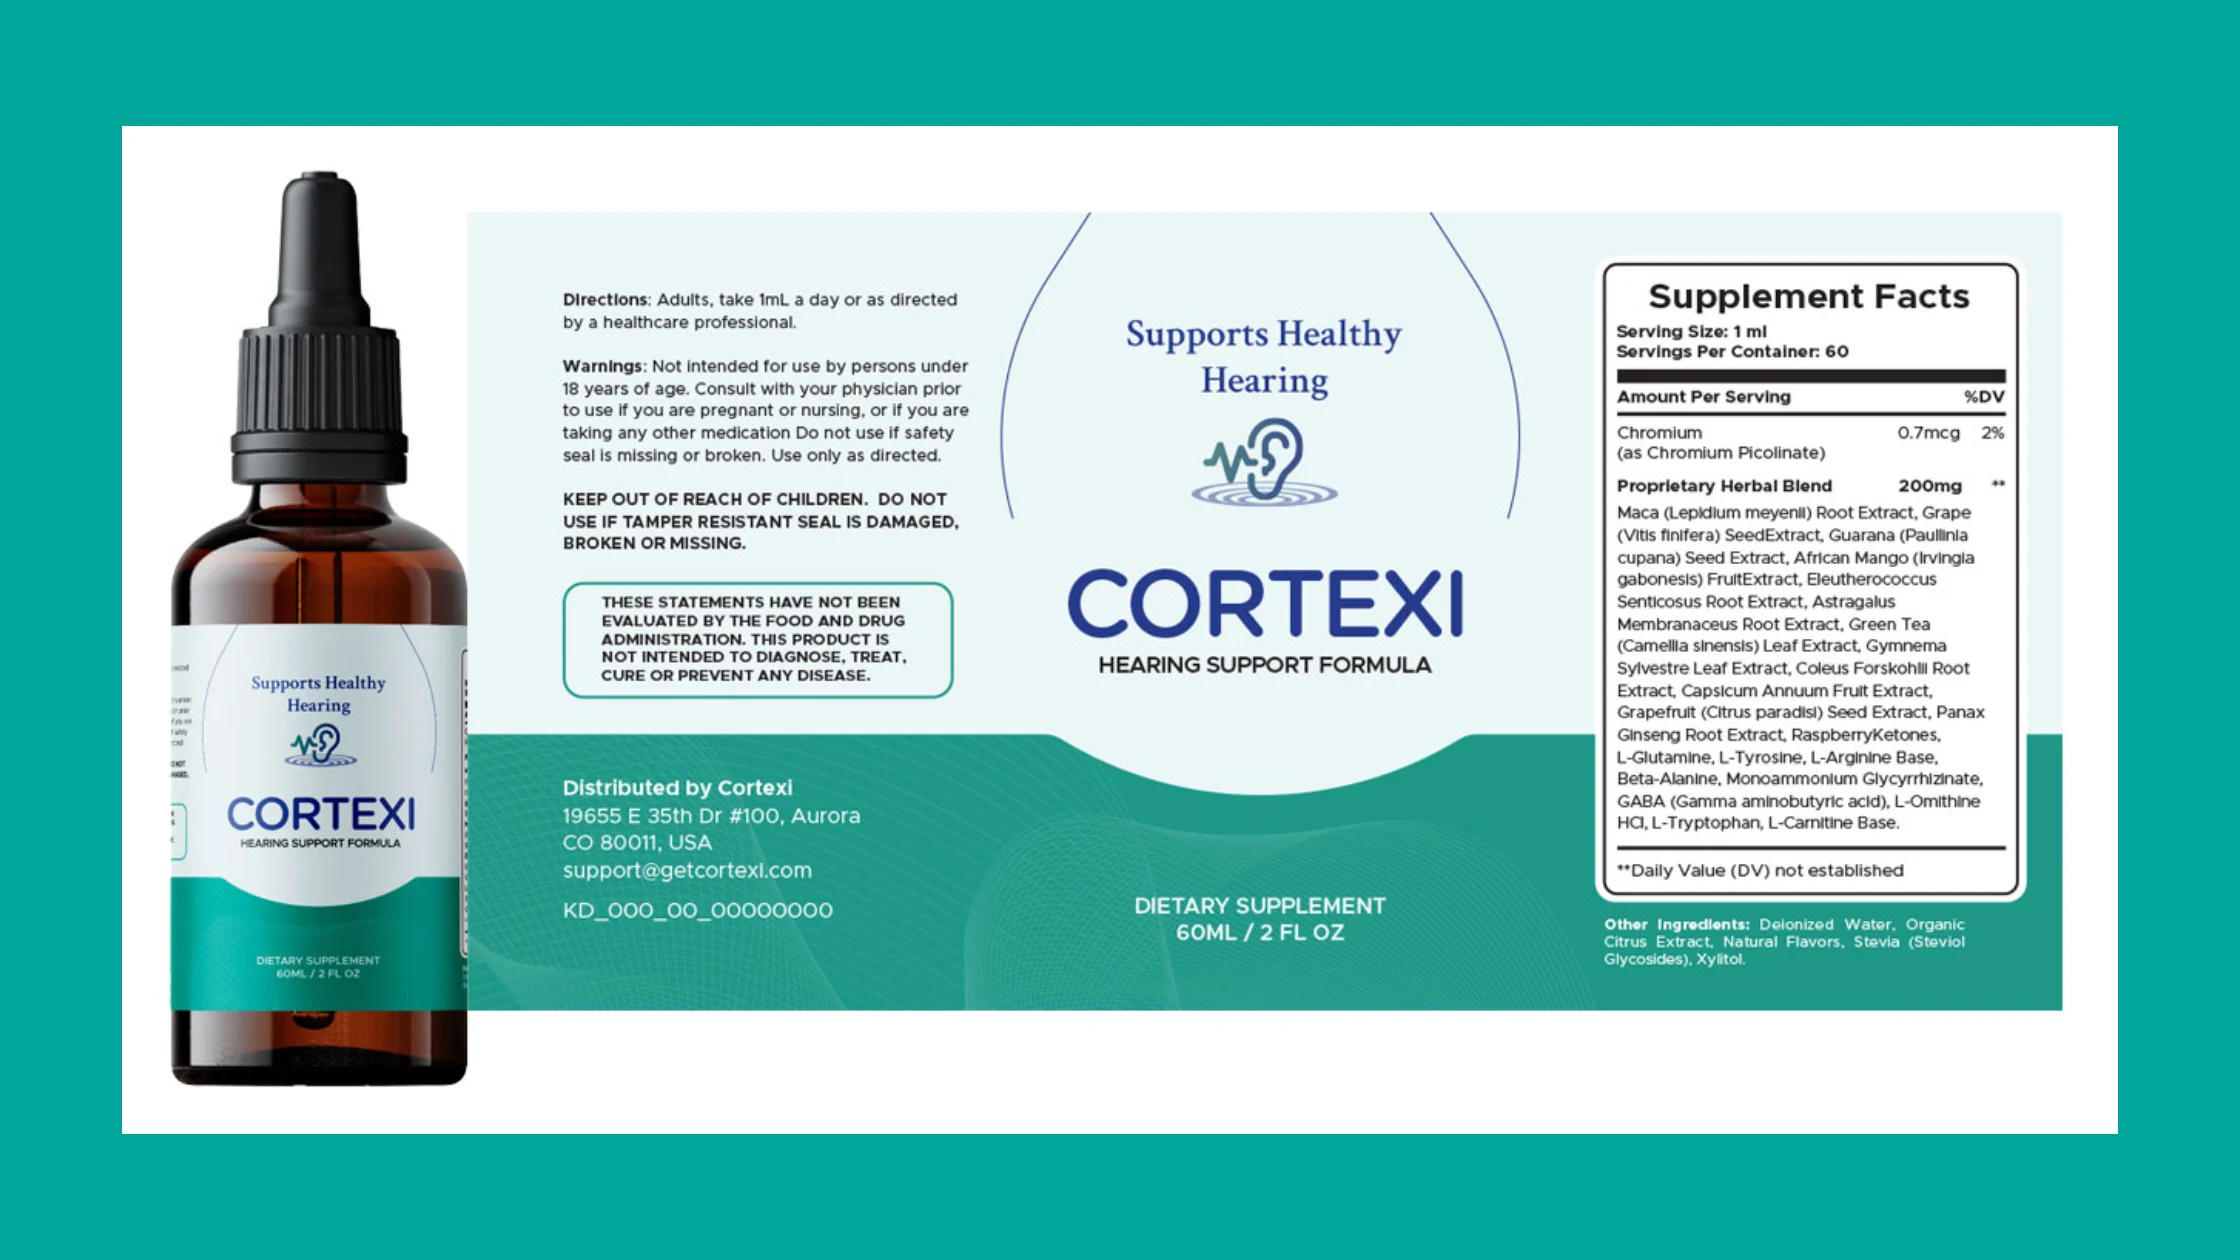 Cortexi supplement facts